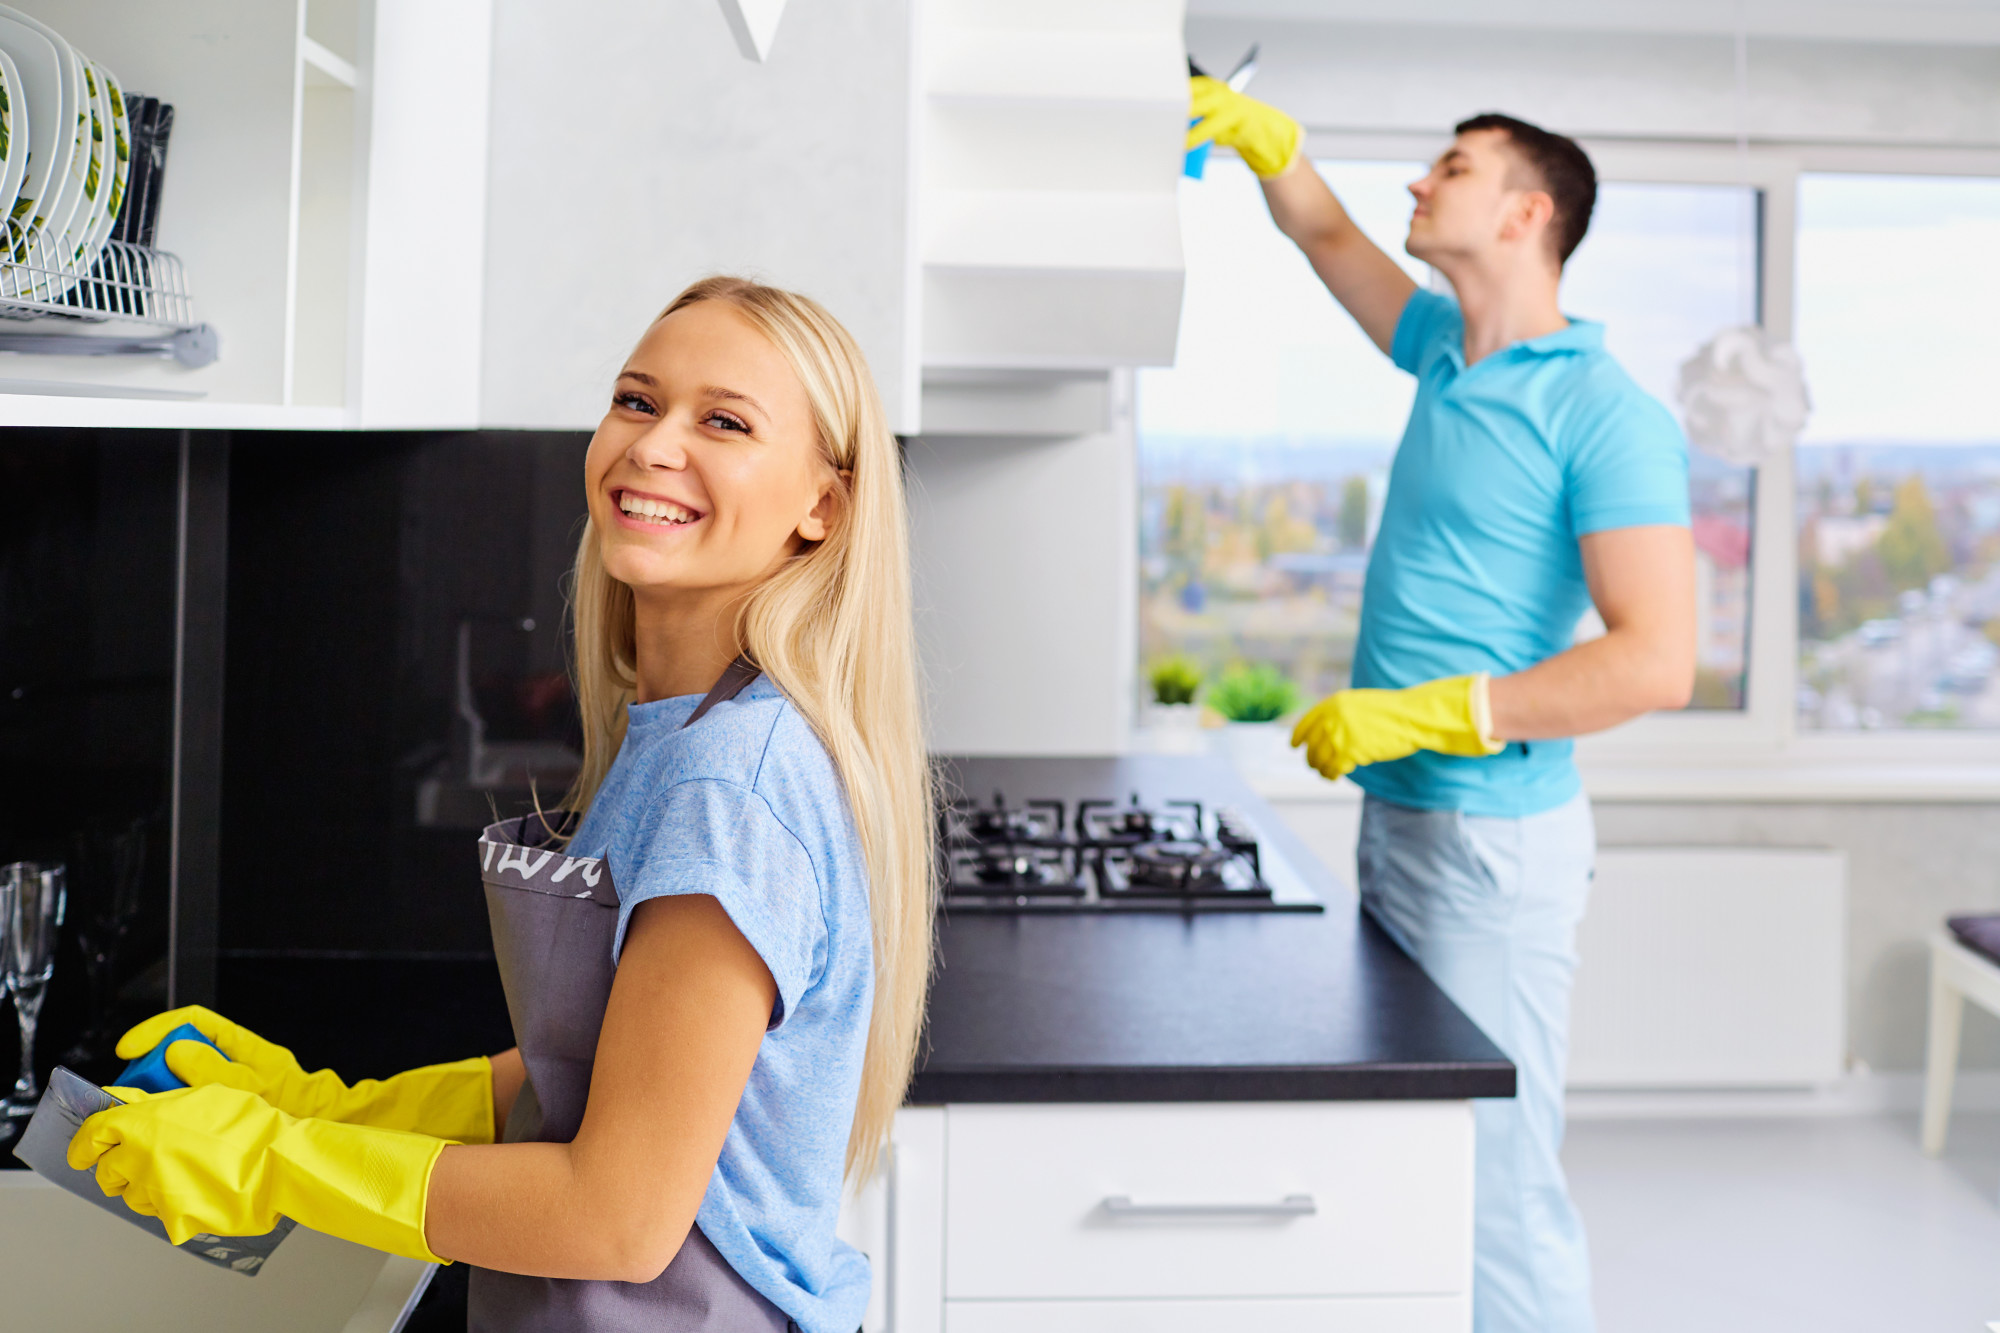 10 Helpful House Cleaning Tips for When You Have No Time to Clean